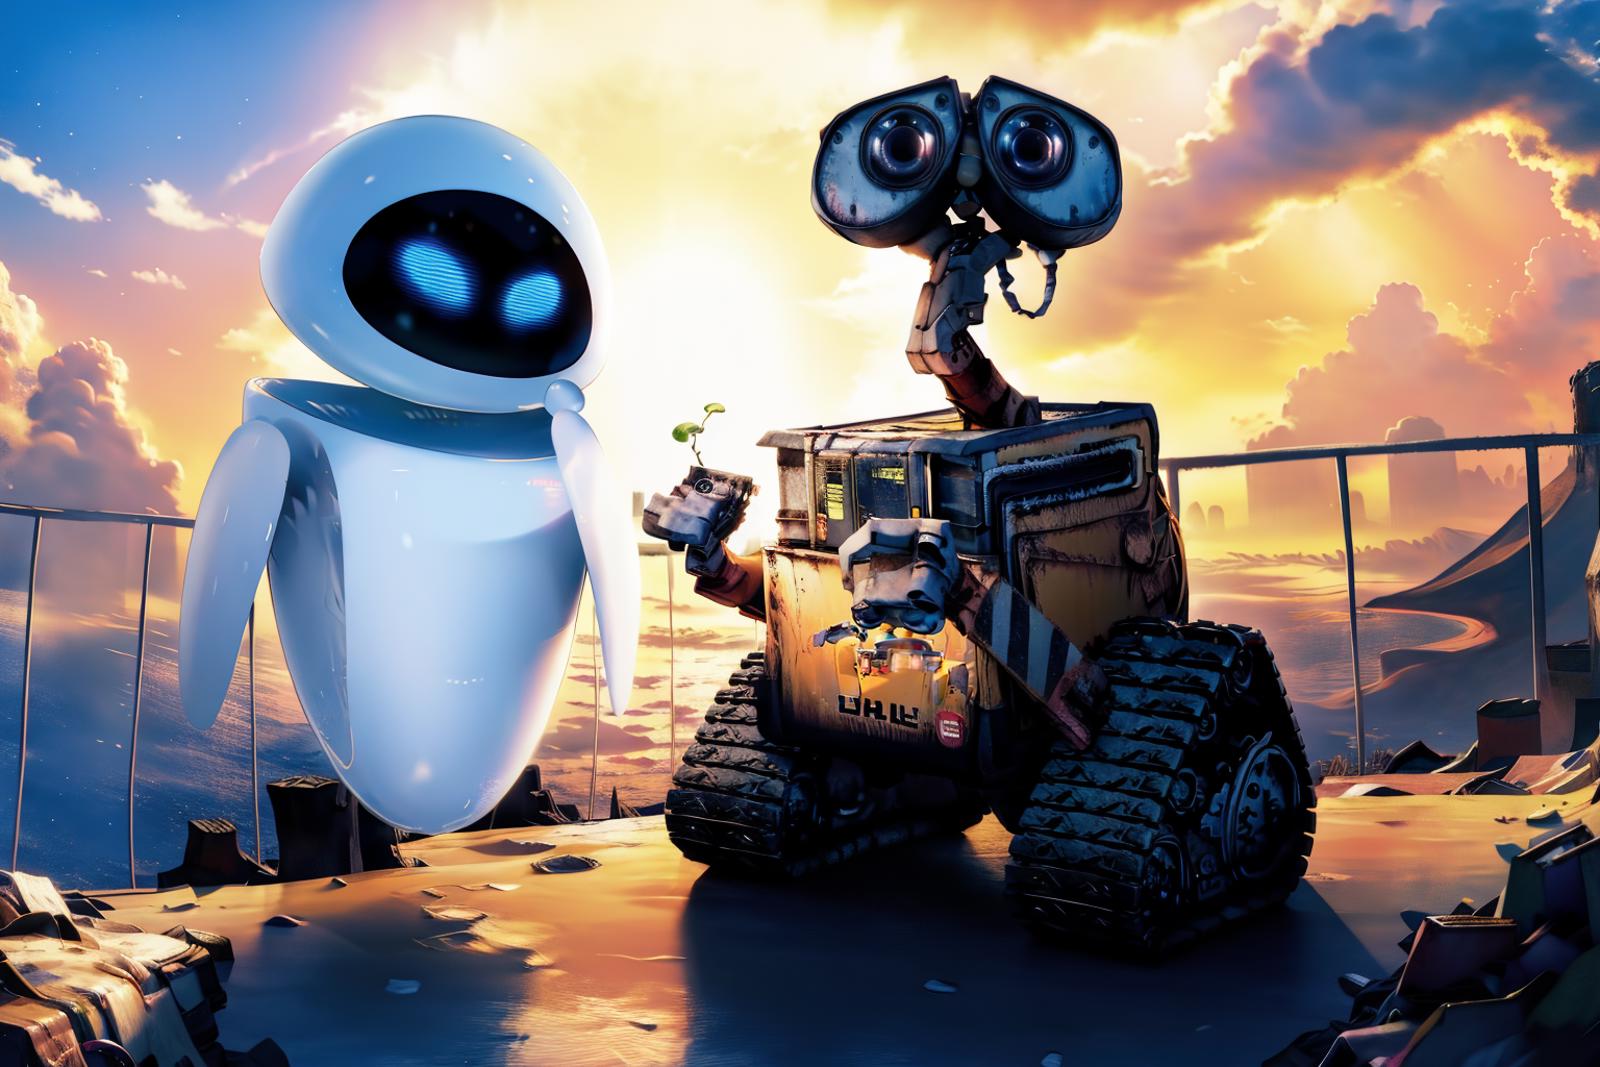 A colorful cartoon illustration of a WALL-E robot and a white robot standing on a rocky surface.